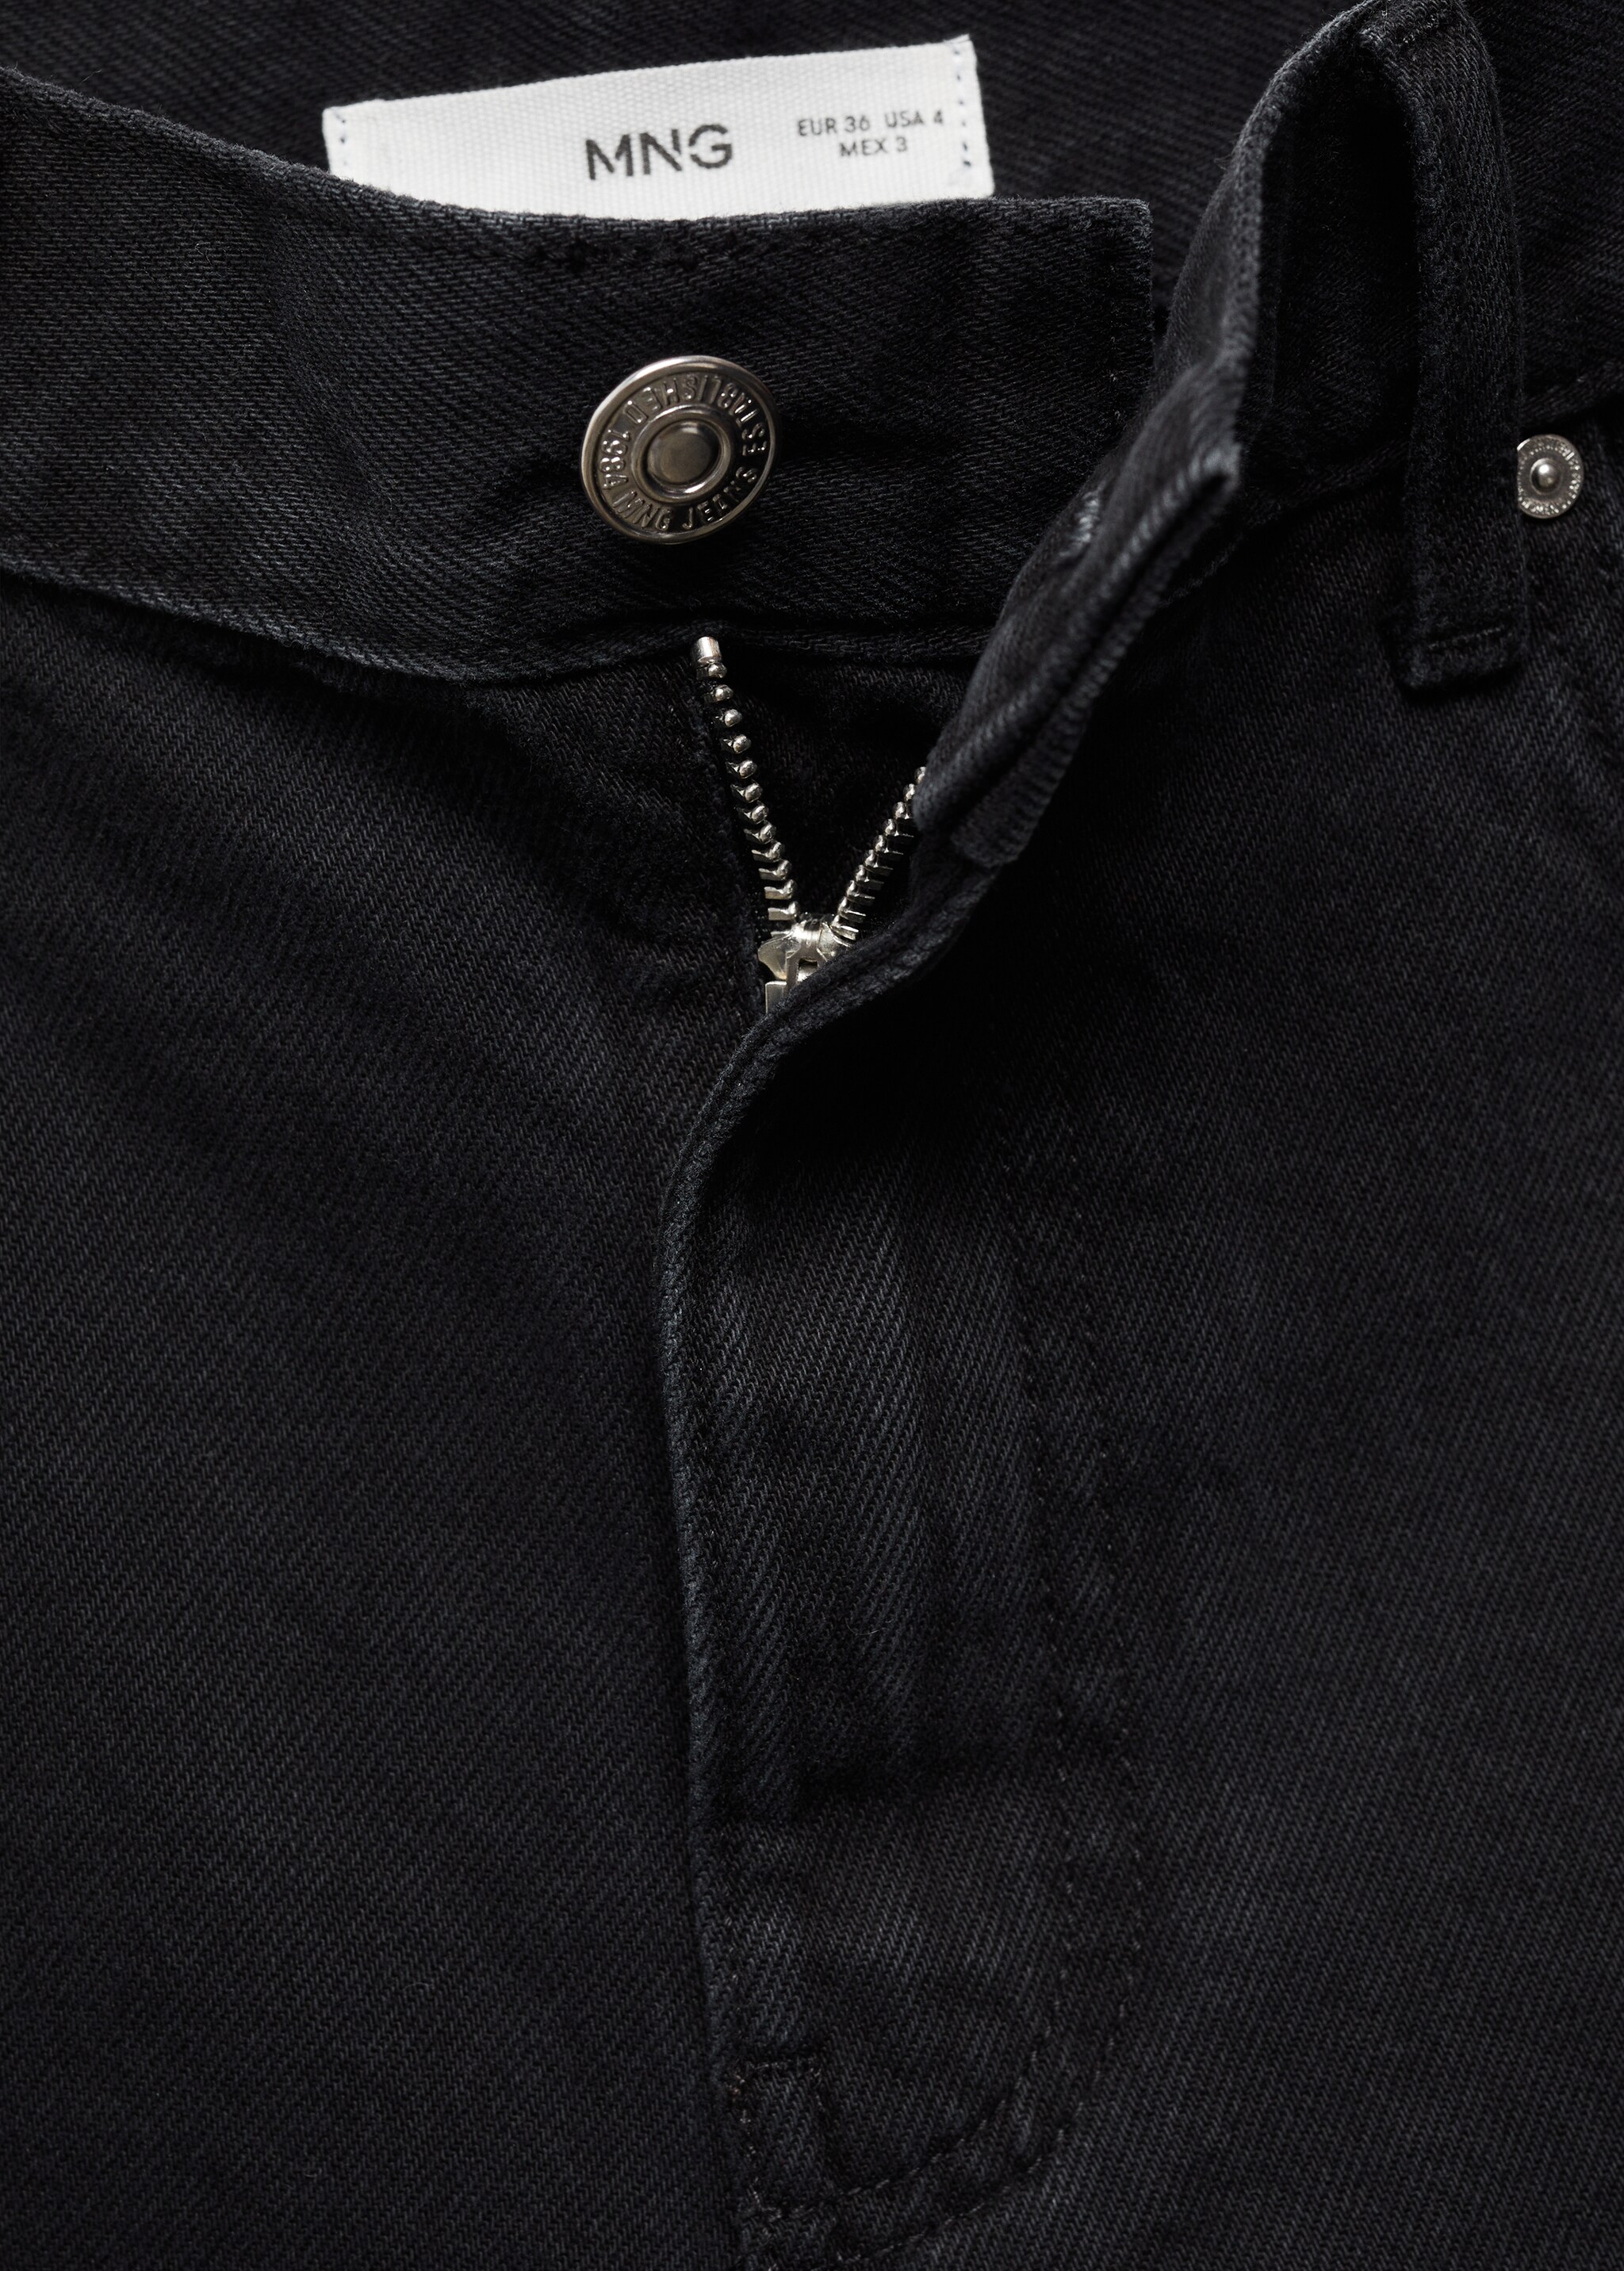 High-rise denim shorts - Details of the article 8